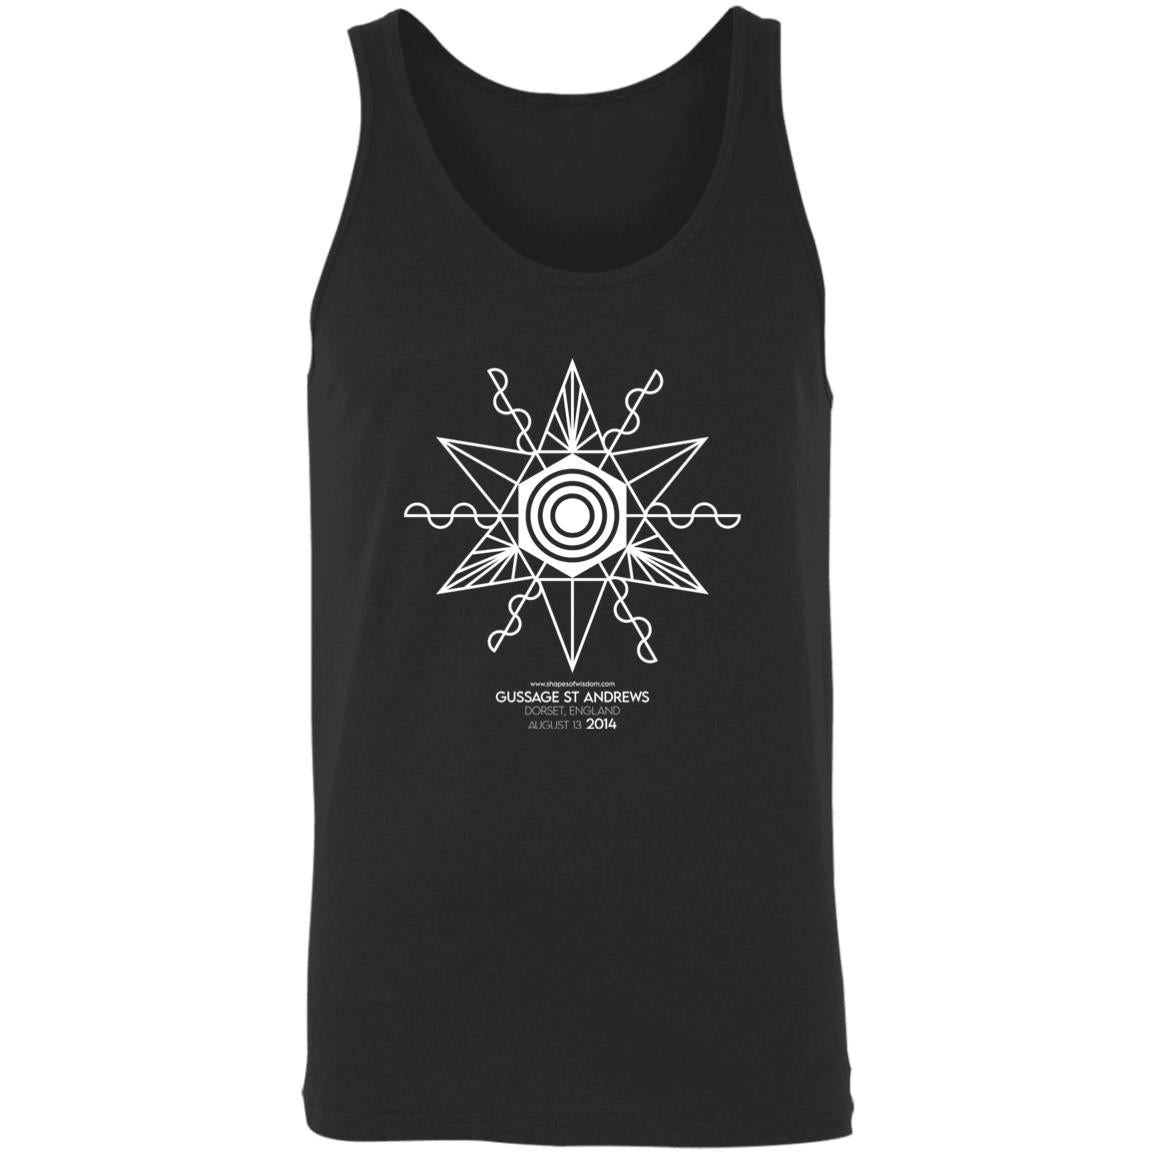 Crop Circle Tank Top - Gussage St Andrews